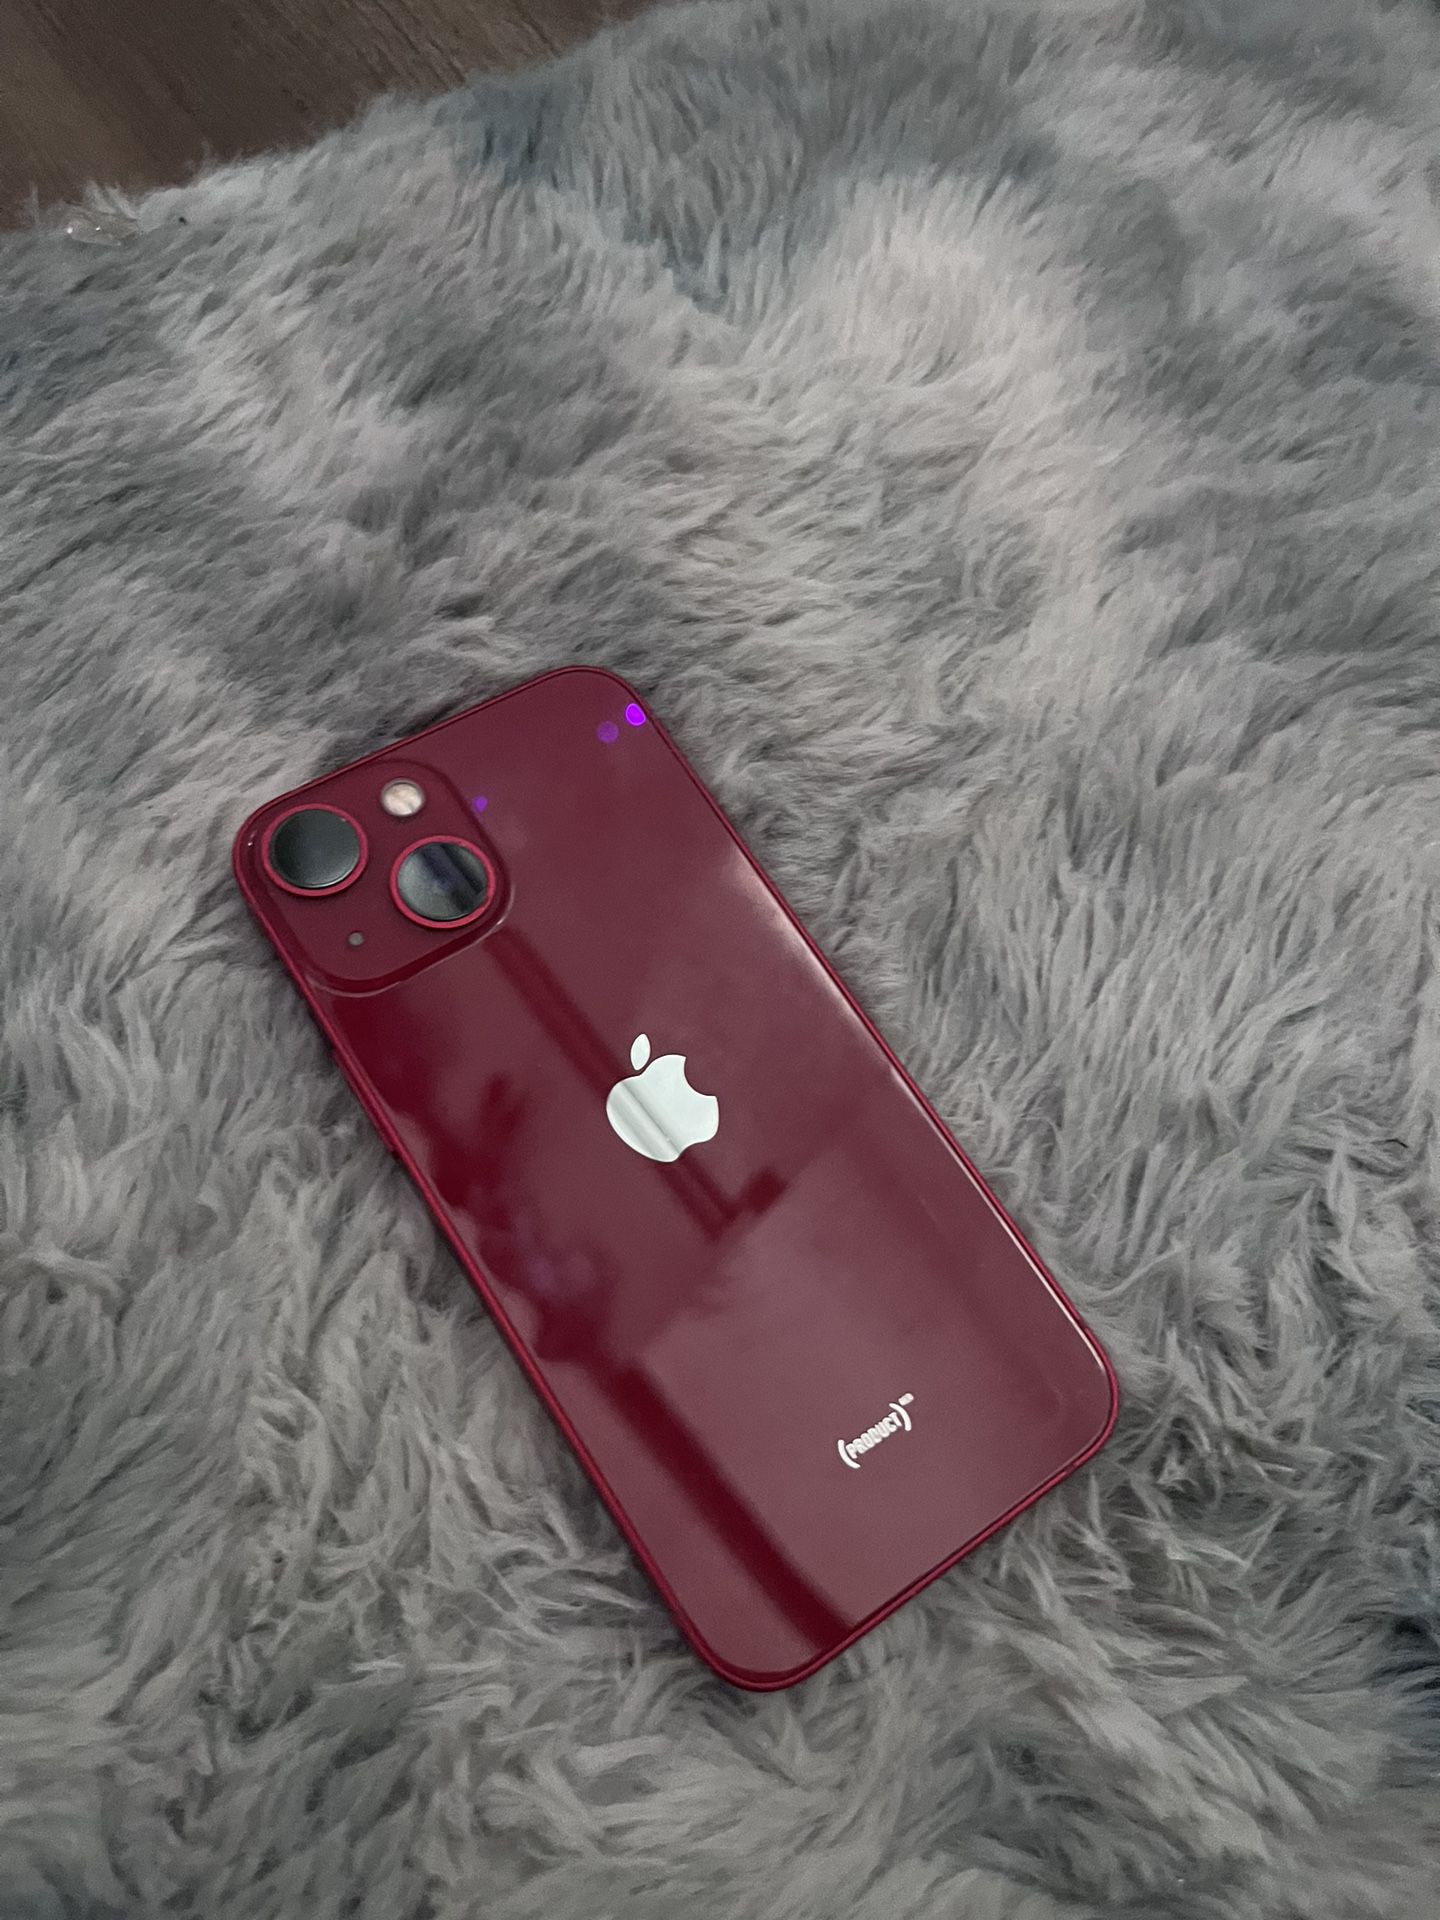 RED ATT 128 GB IPHONE 13 MINI for Sale in Spanish Springs, NV - OfferUp